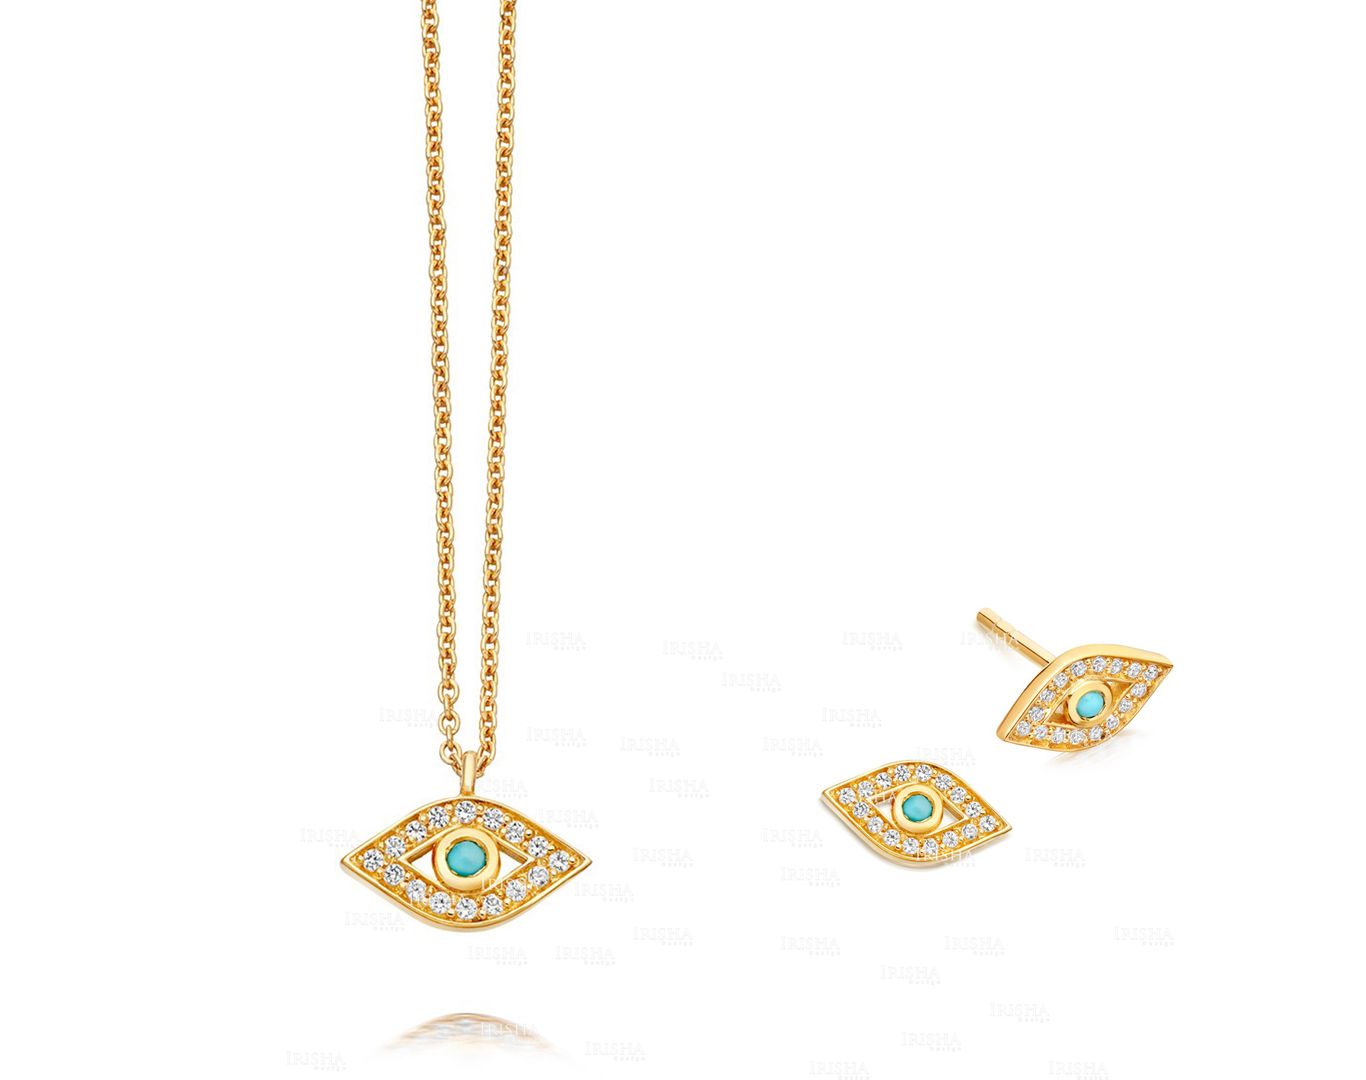 Genuine Diamond And Turquoise Evil Eye Earrings Necklace 14K Gold Jewelry Set